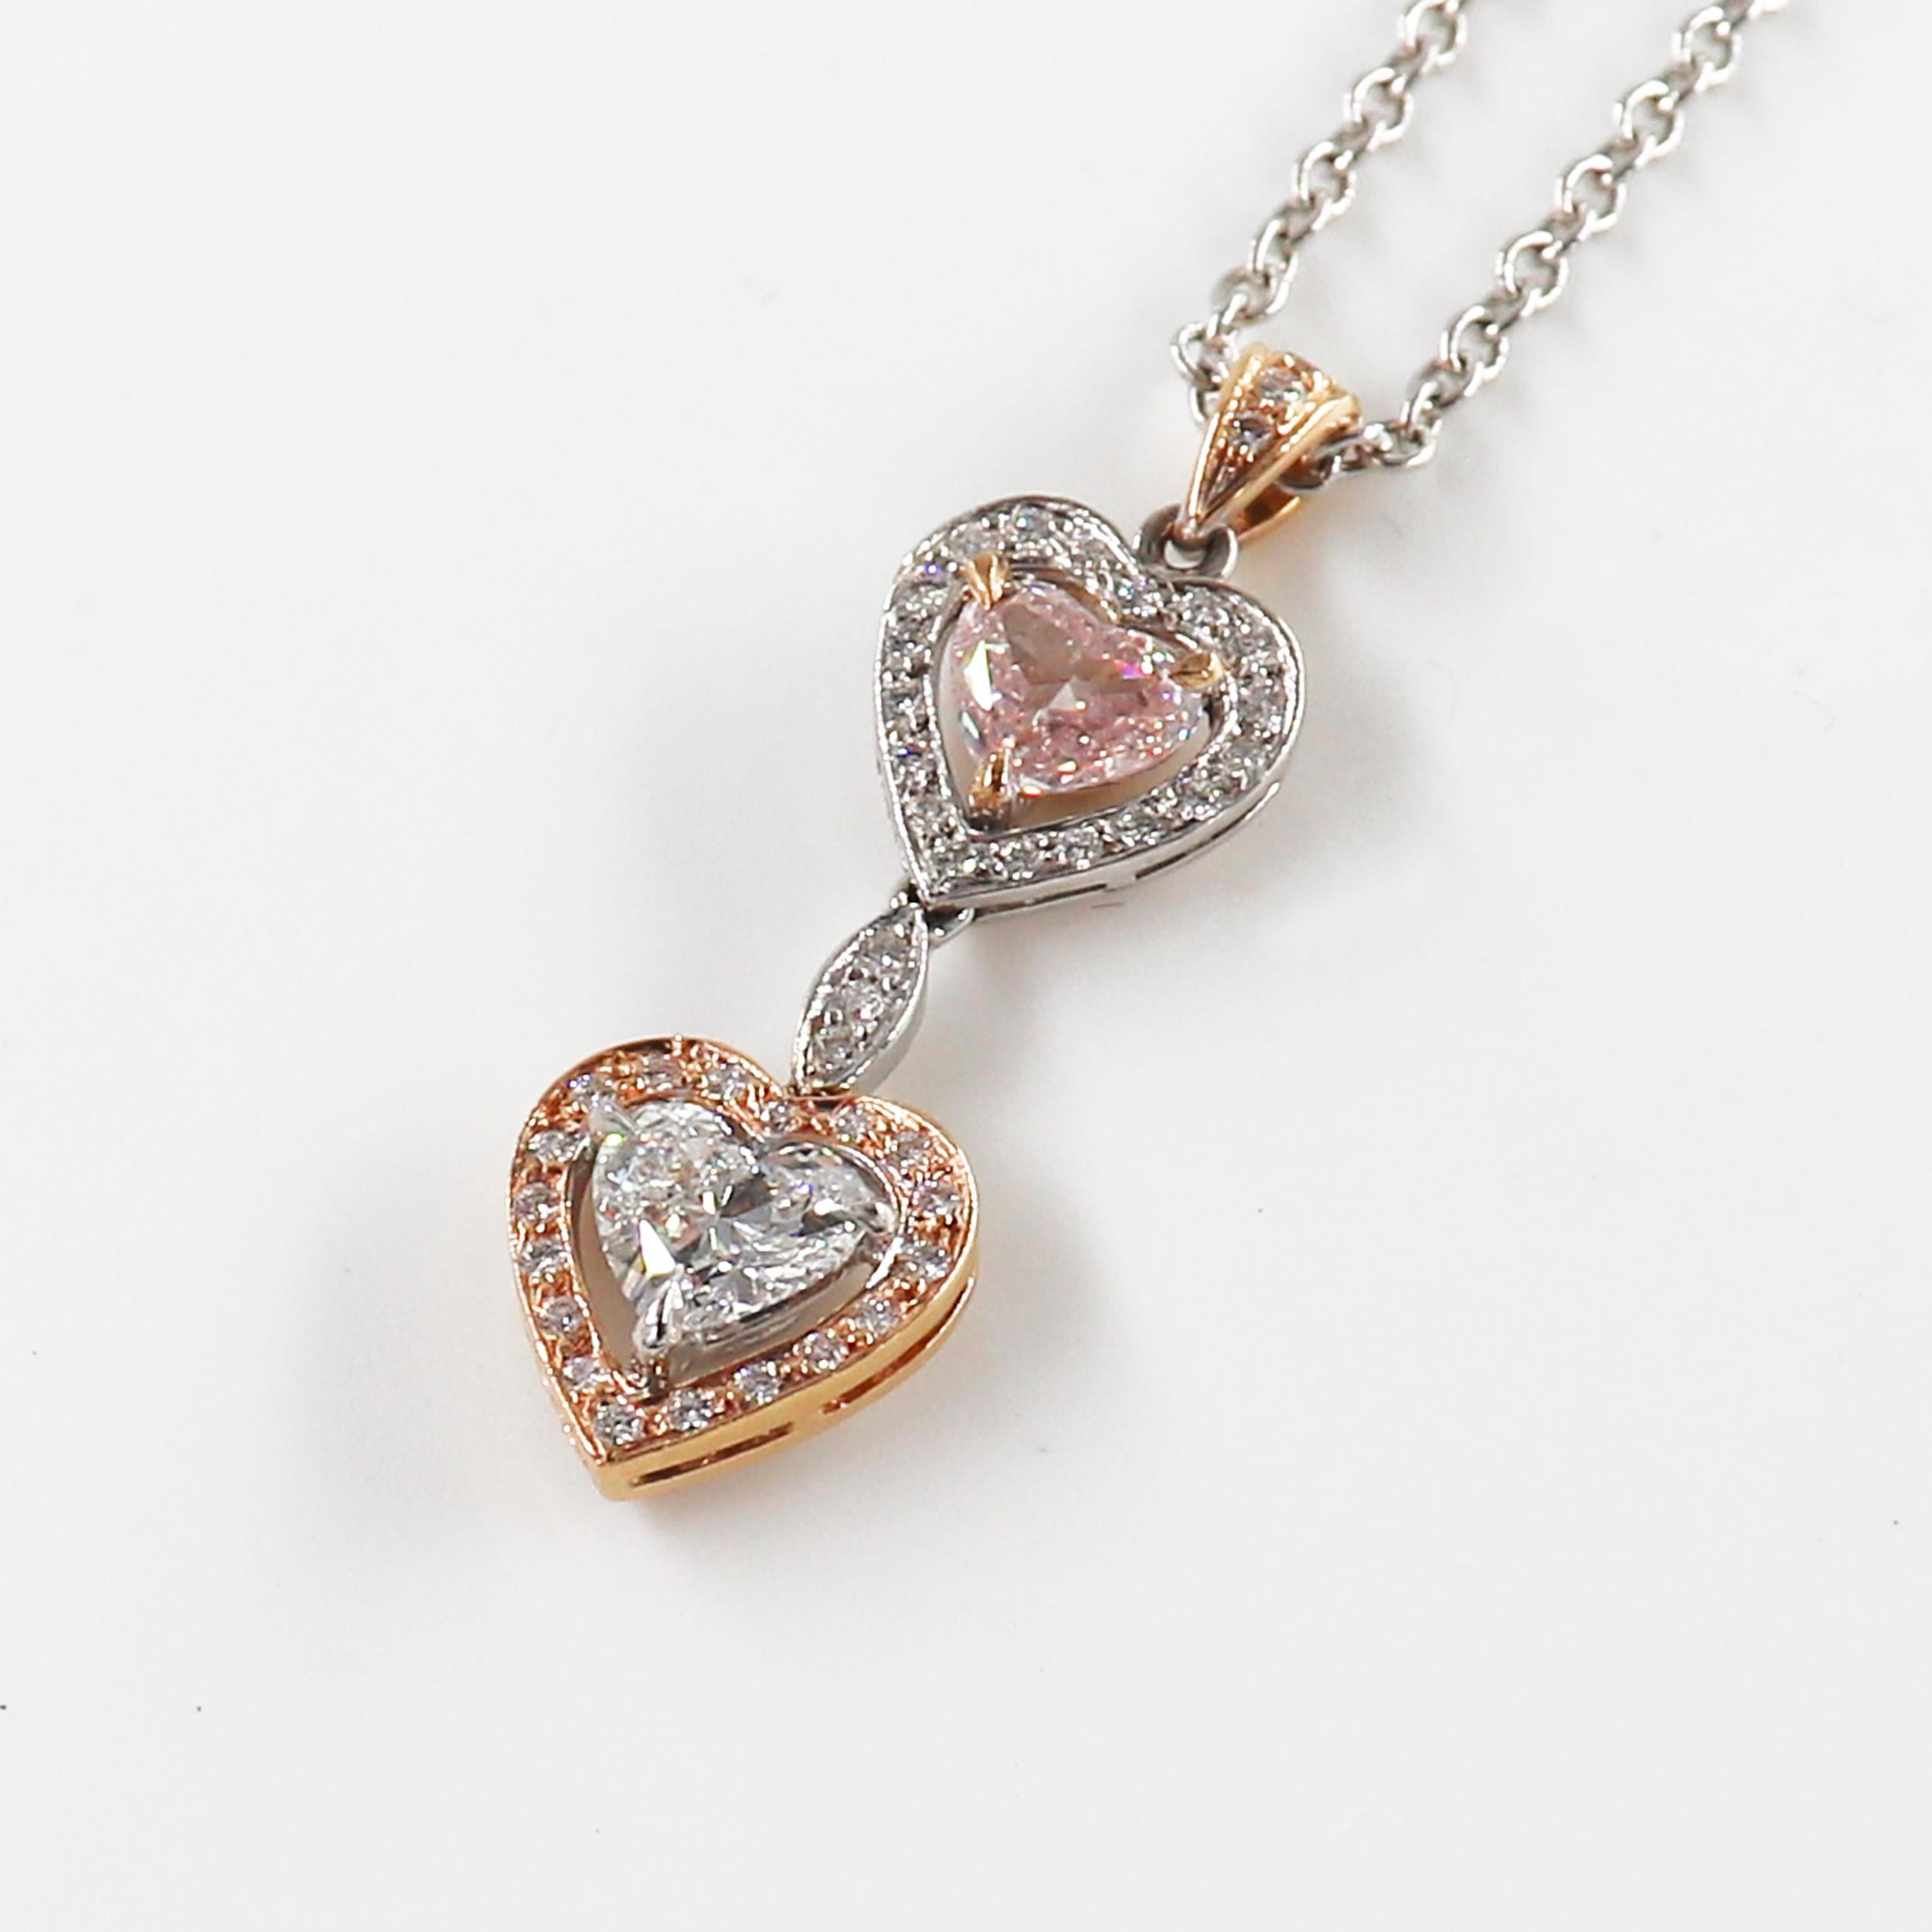 This White Gold Necklace features a delicious Pendant with two heart-shaped Diamonds, one white and the other pink, each weighing 0.80 carat. Those delicate heart-shaped Diamonds are flanked by a bright-cut pave for a total weight of 0.28 carat.